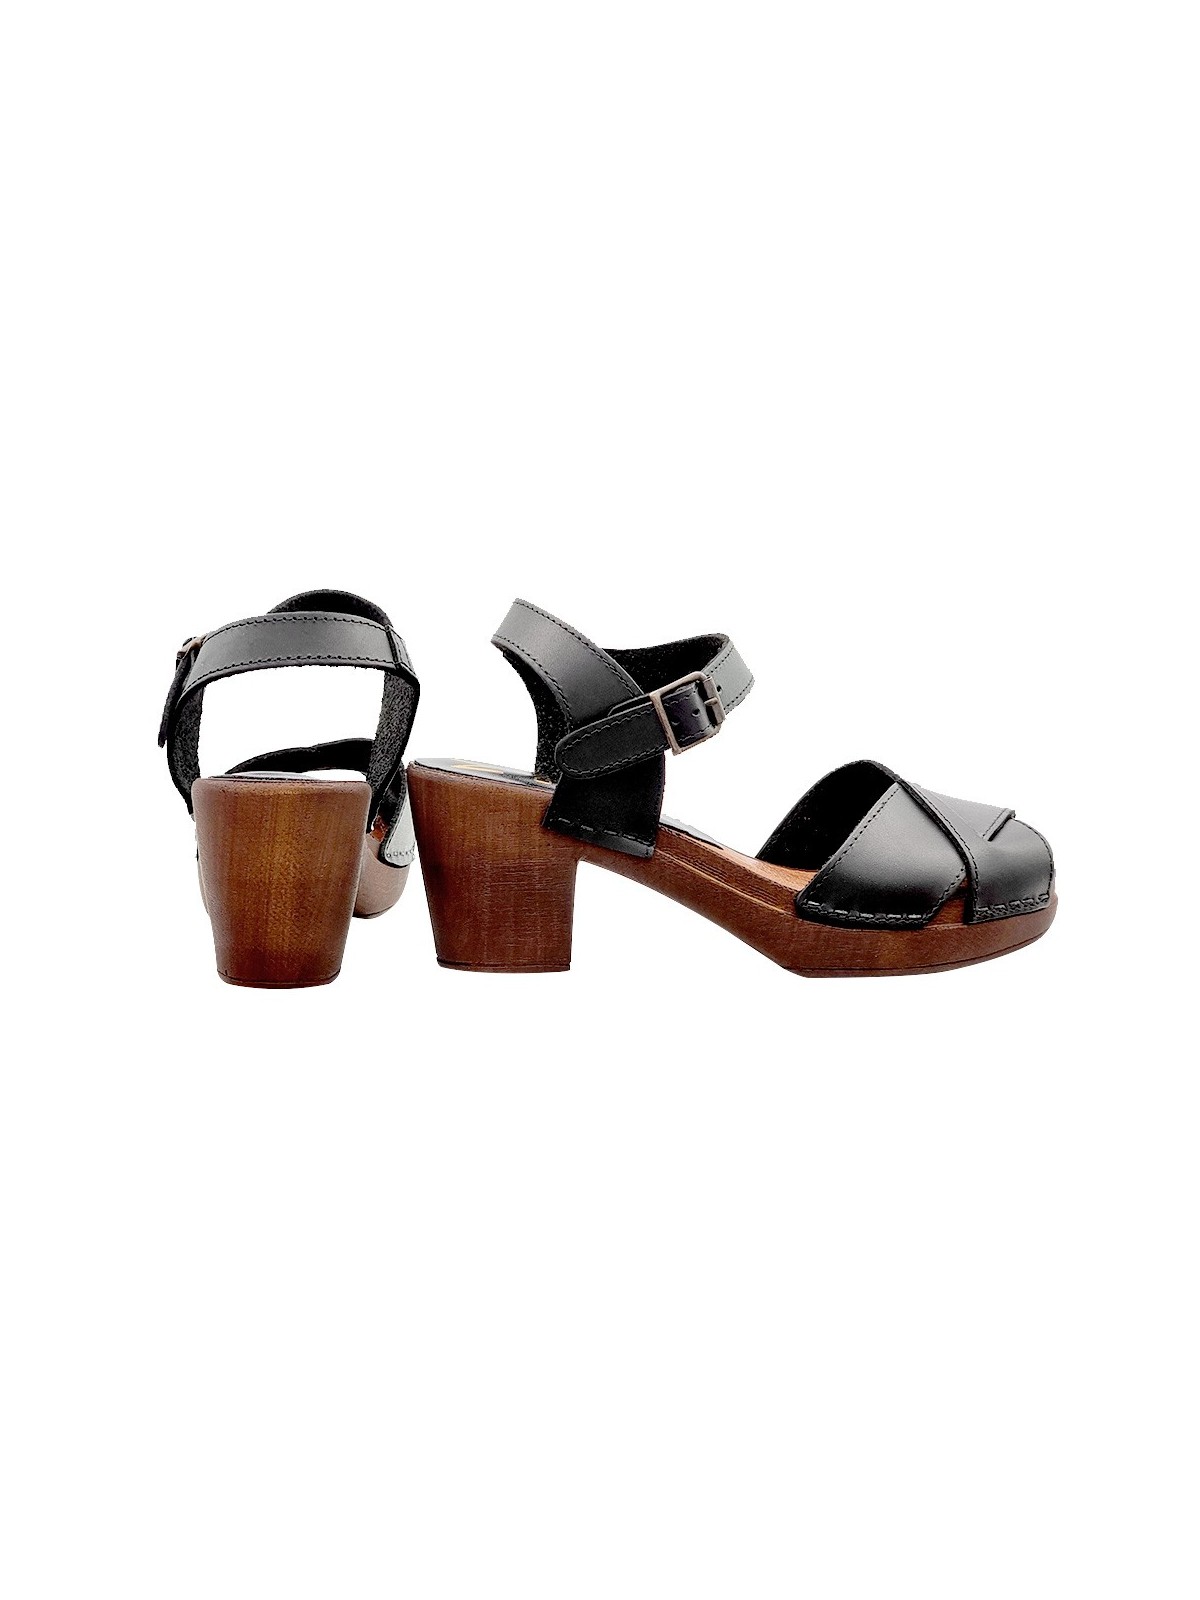 BLACK SANDALS WITH CROSSED BANDS AND 6,5 HEEL